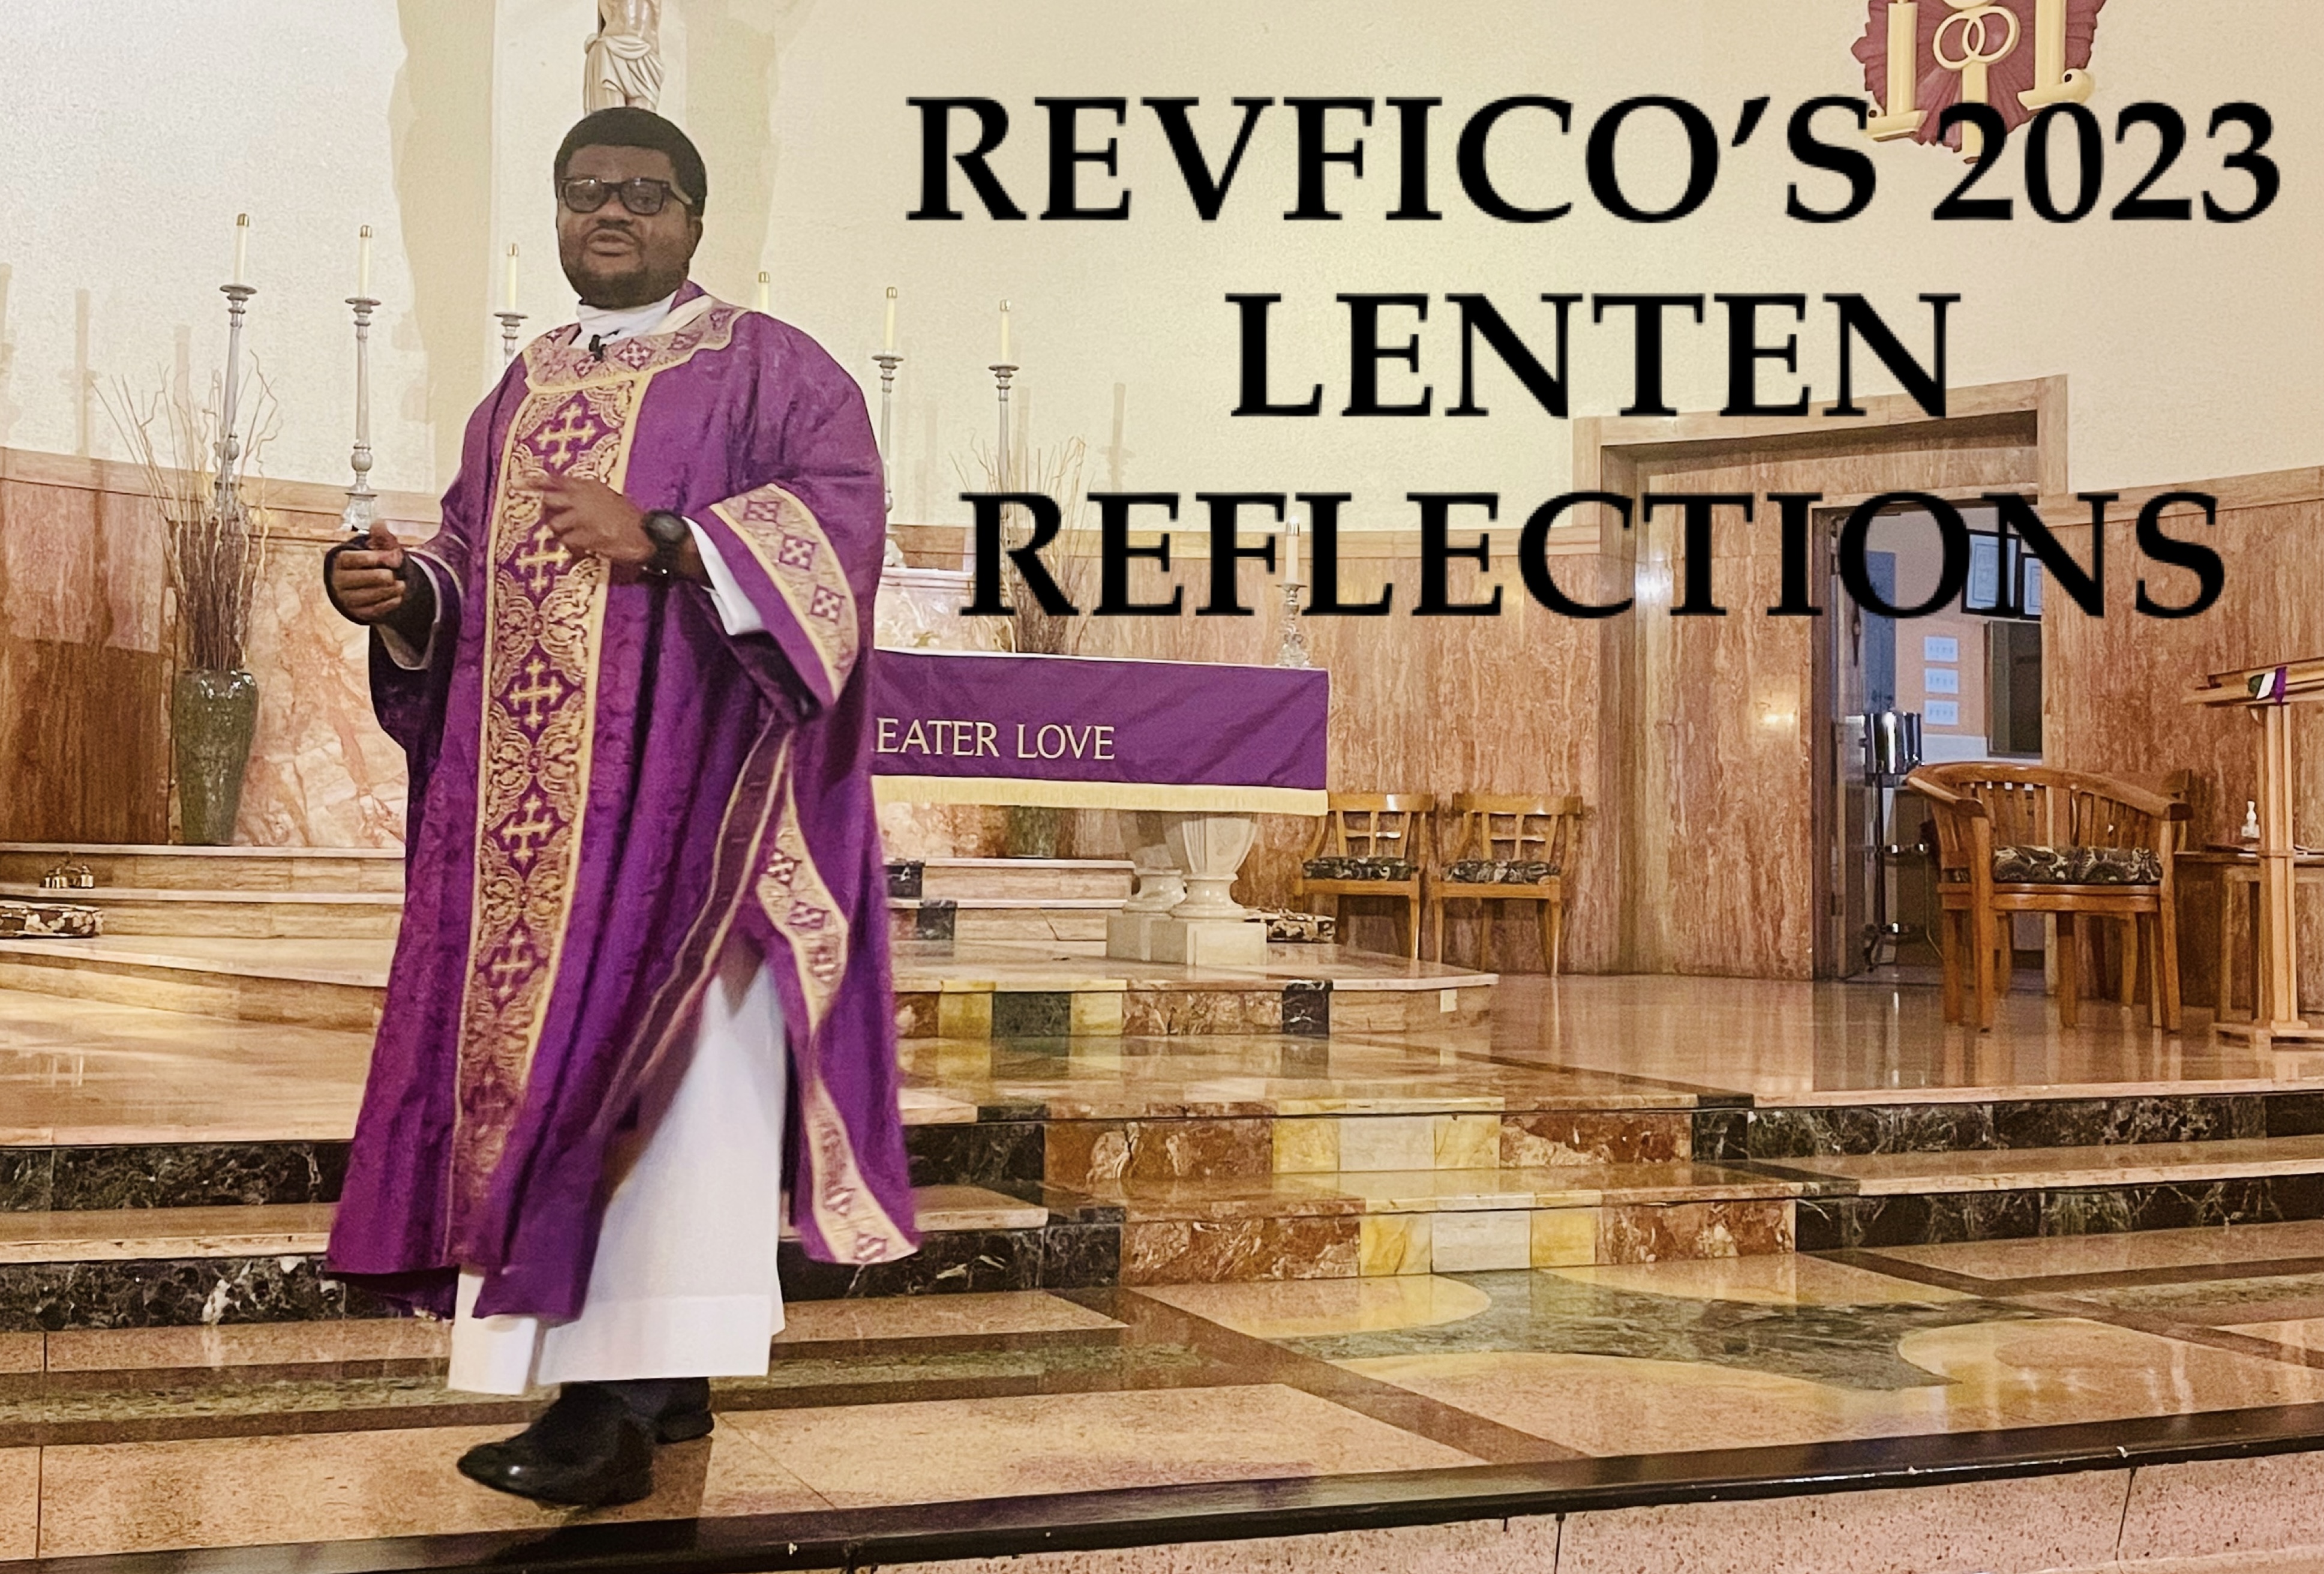 First Sunday of Lent, Year A, 2023 Reflection by RevFICO